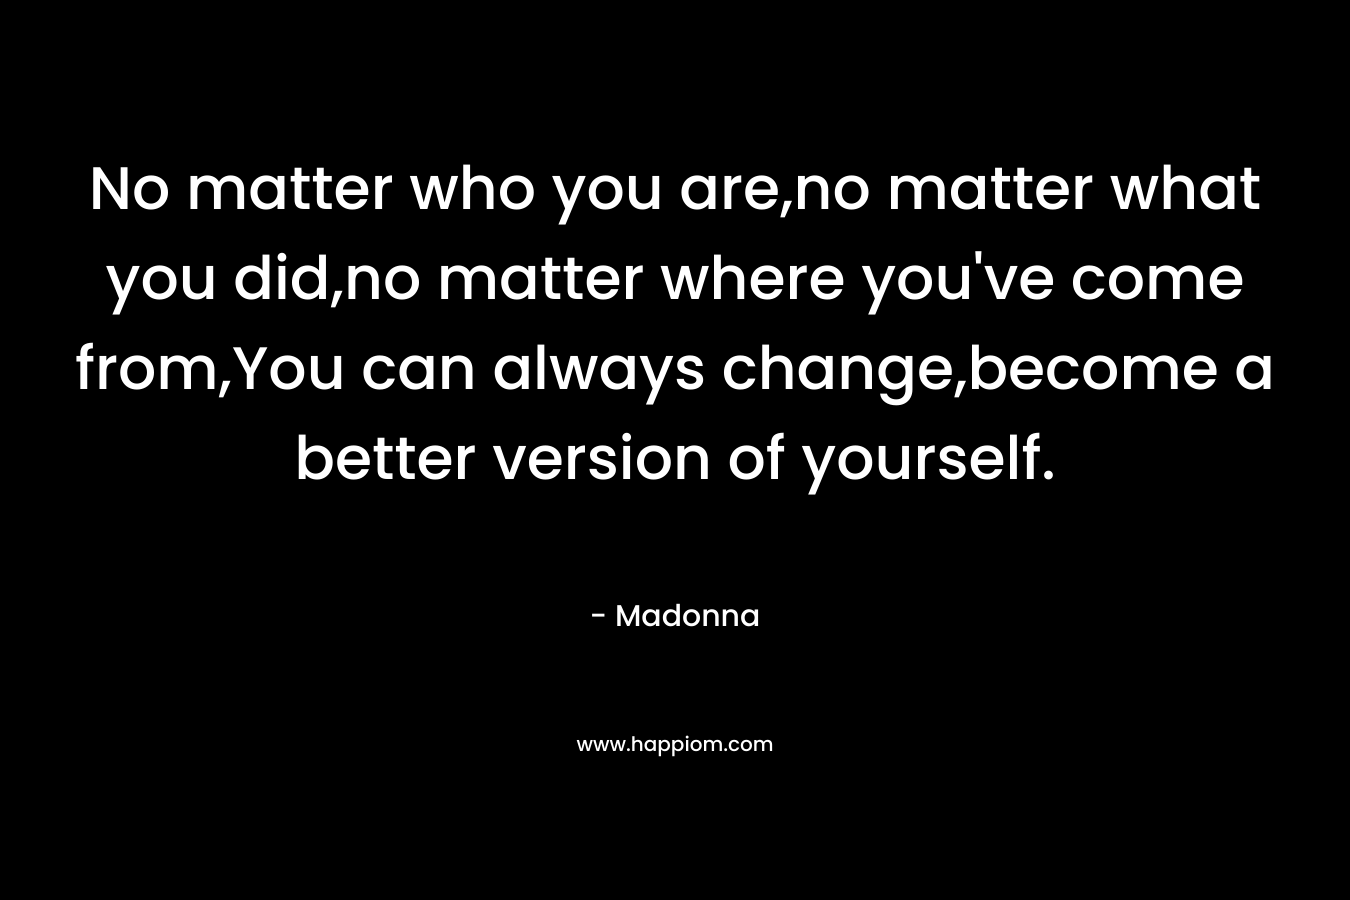 No matter who you are,no matter what you did,no matter where you've come from,You can always change,become a better version of yourself.